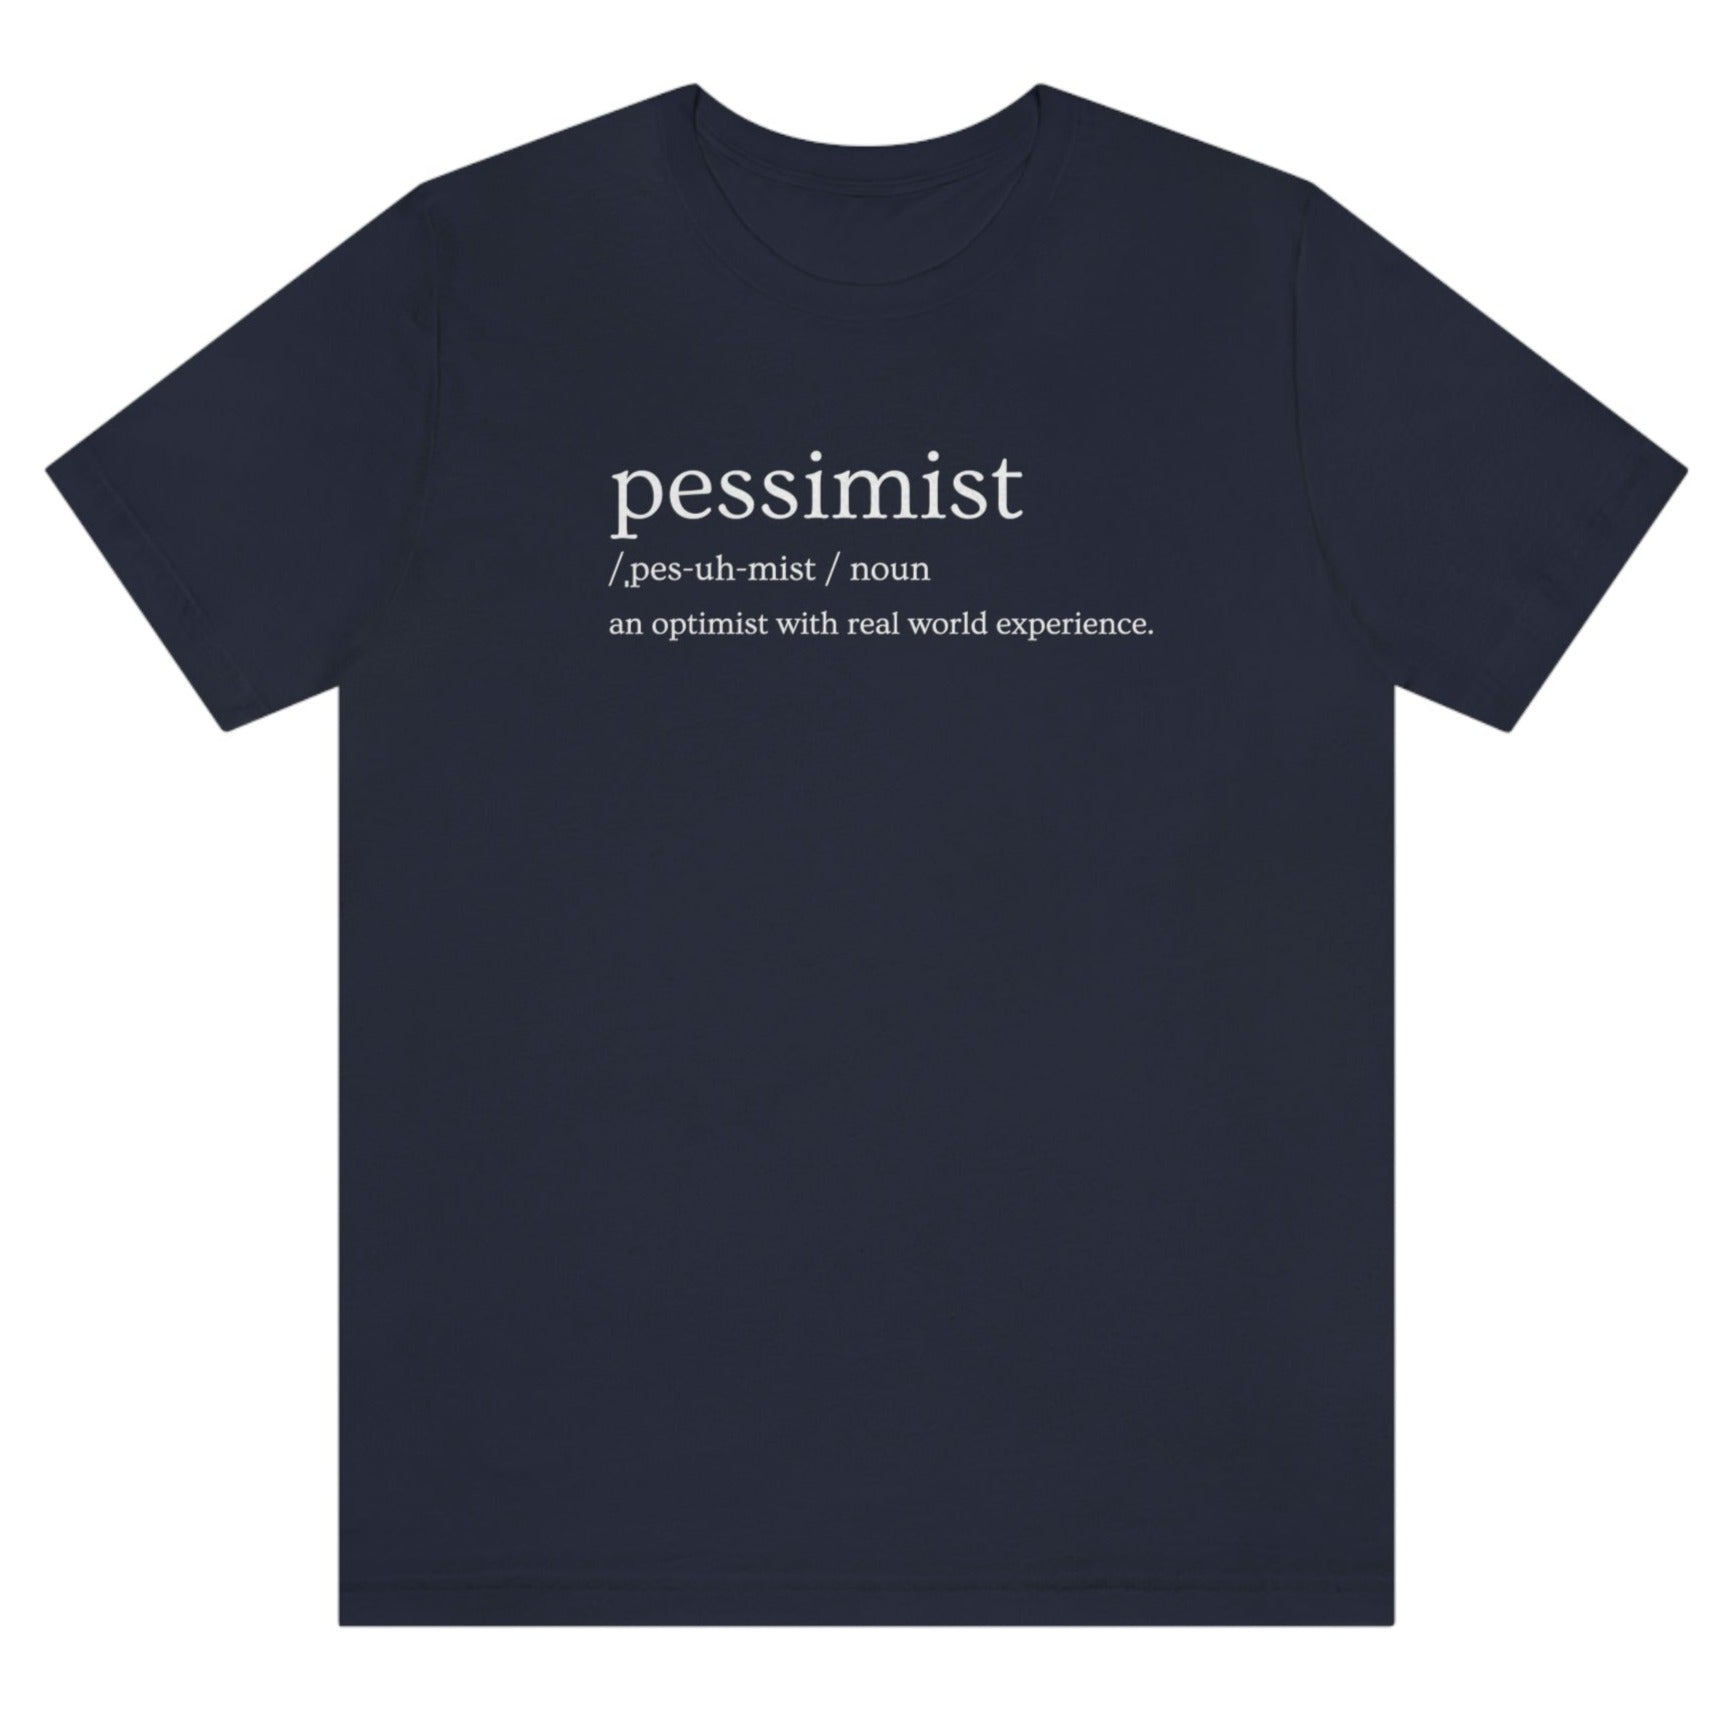 pessimist-an-optimist-with-real-world-experience-navy-t-shirt